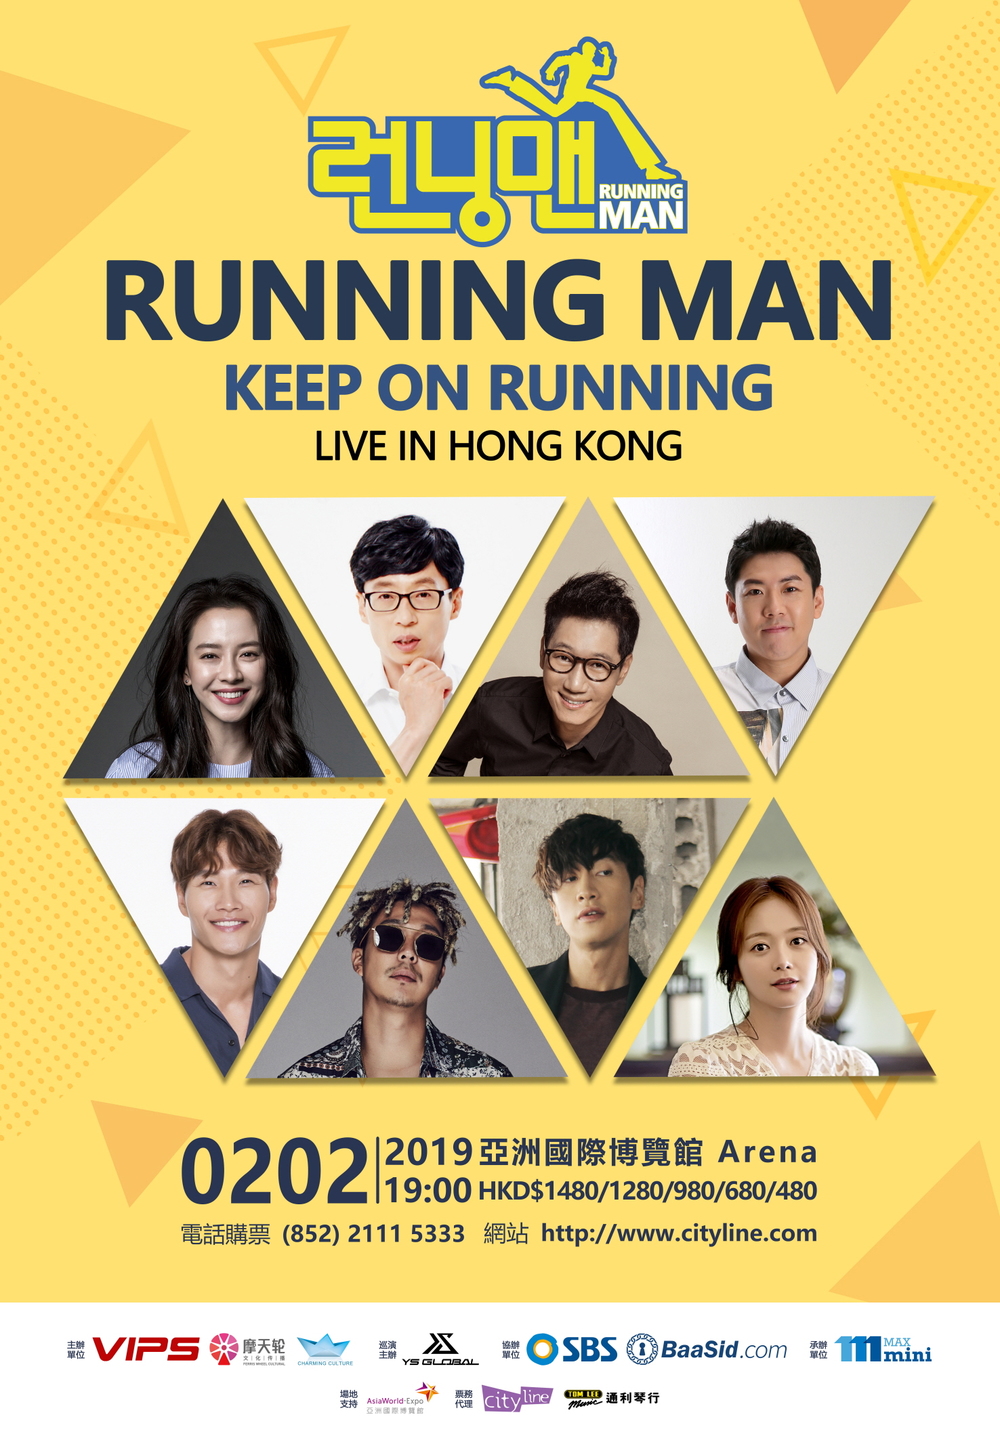 While SBS Running Man is steadily gaining popularity overseas, the first official overseas fan meeting Asia tour in the new year will begin in Hong Kong.The Hong Kong Fan Meeting Event, which will be attended by all members following last years Taiwan Fan Meeting, will be held at Hong Kong Asia World Expo Arena (hereinafter referred to as Hong Kong Arena) on February 2.Yoo Jae-Suk left many regrets at the Hong Kong Event in 2017, but this year, Yoo Jae-Suk will attend, as well as new members Jeon So-min and Yang Se-chan will join and meet with fans from China.Unlike Korean Wave actors and singers, fans who visit Running Man Fan Meetings have a wide range of age groups and a significant family participation, said Lee Dong-hwa, CEO of Wyeth Global Entertainment, an Asian tour organizer of Running Man Fan Meeting.Although it is rare for major members of the Korean entertainment program to hold overseas fan meetings, Hong Kong Arena, the Hong Kong venue, is the largest venue in Hong Kong that accommodates more than 10,000 people, proving the popularity of Running Man locally, a SBS official said of the Running Man fan meeting.Running Mans overseas fan meeting plans to continue its Asian tour to Southeast Asia, where Running Man is gaining huge popularity starting this year in Hong Kong.bak-beauty